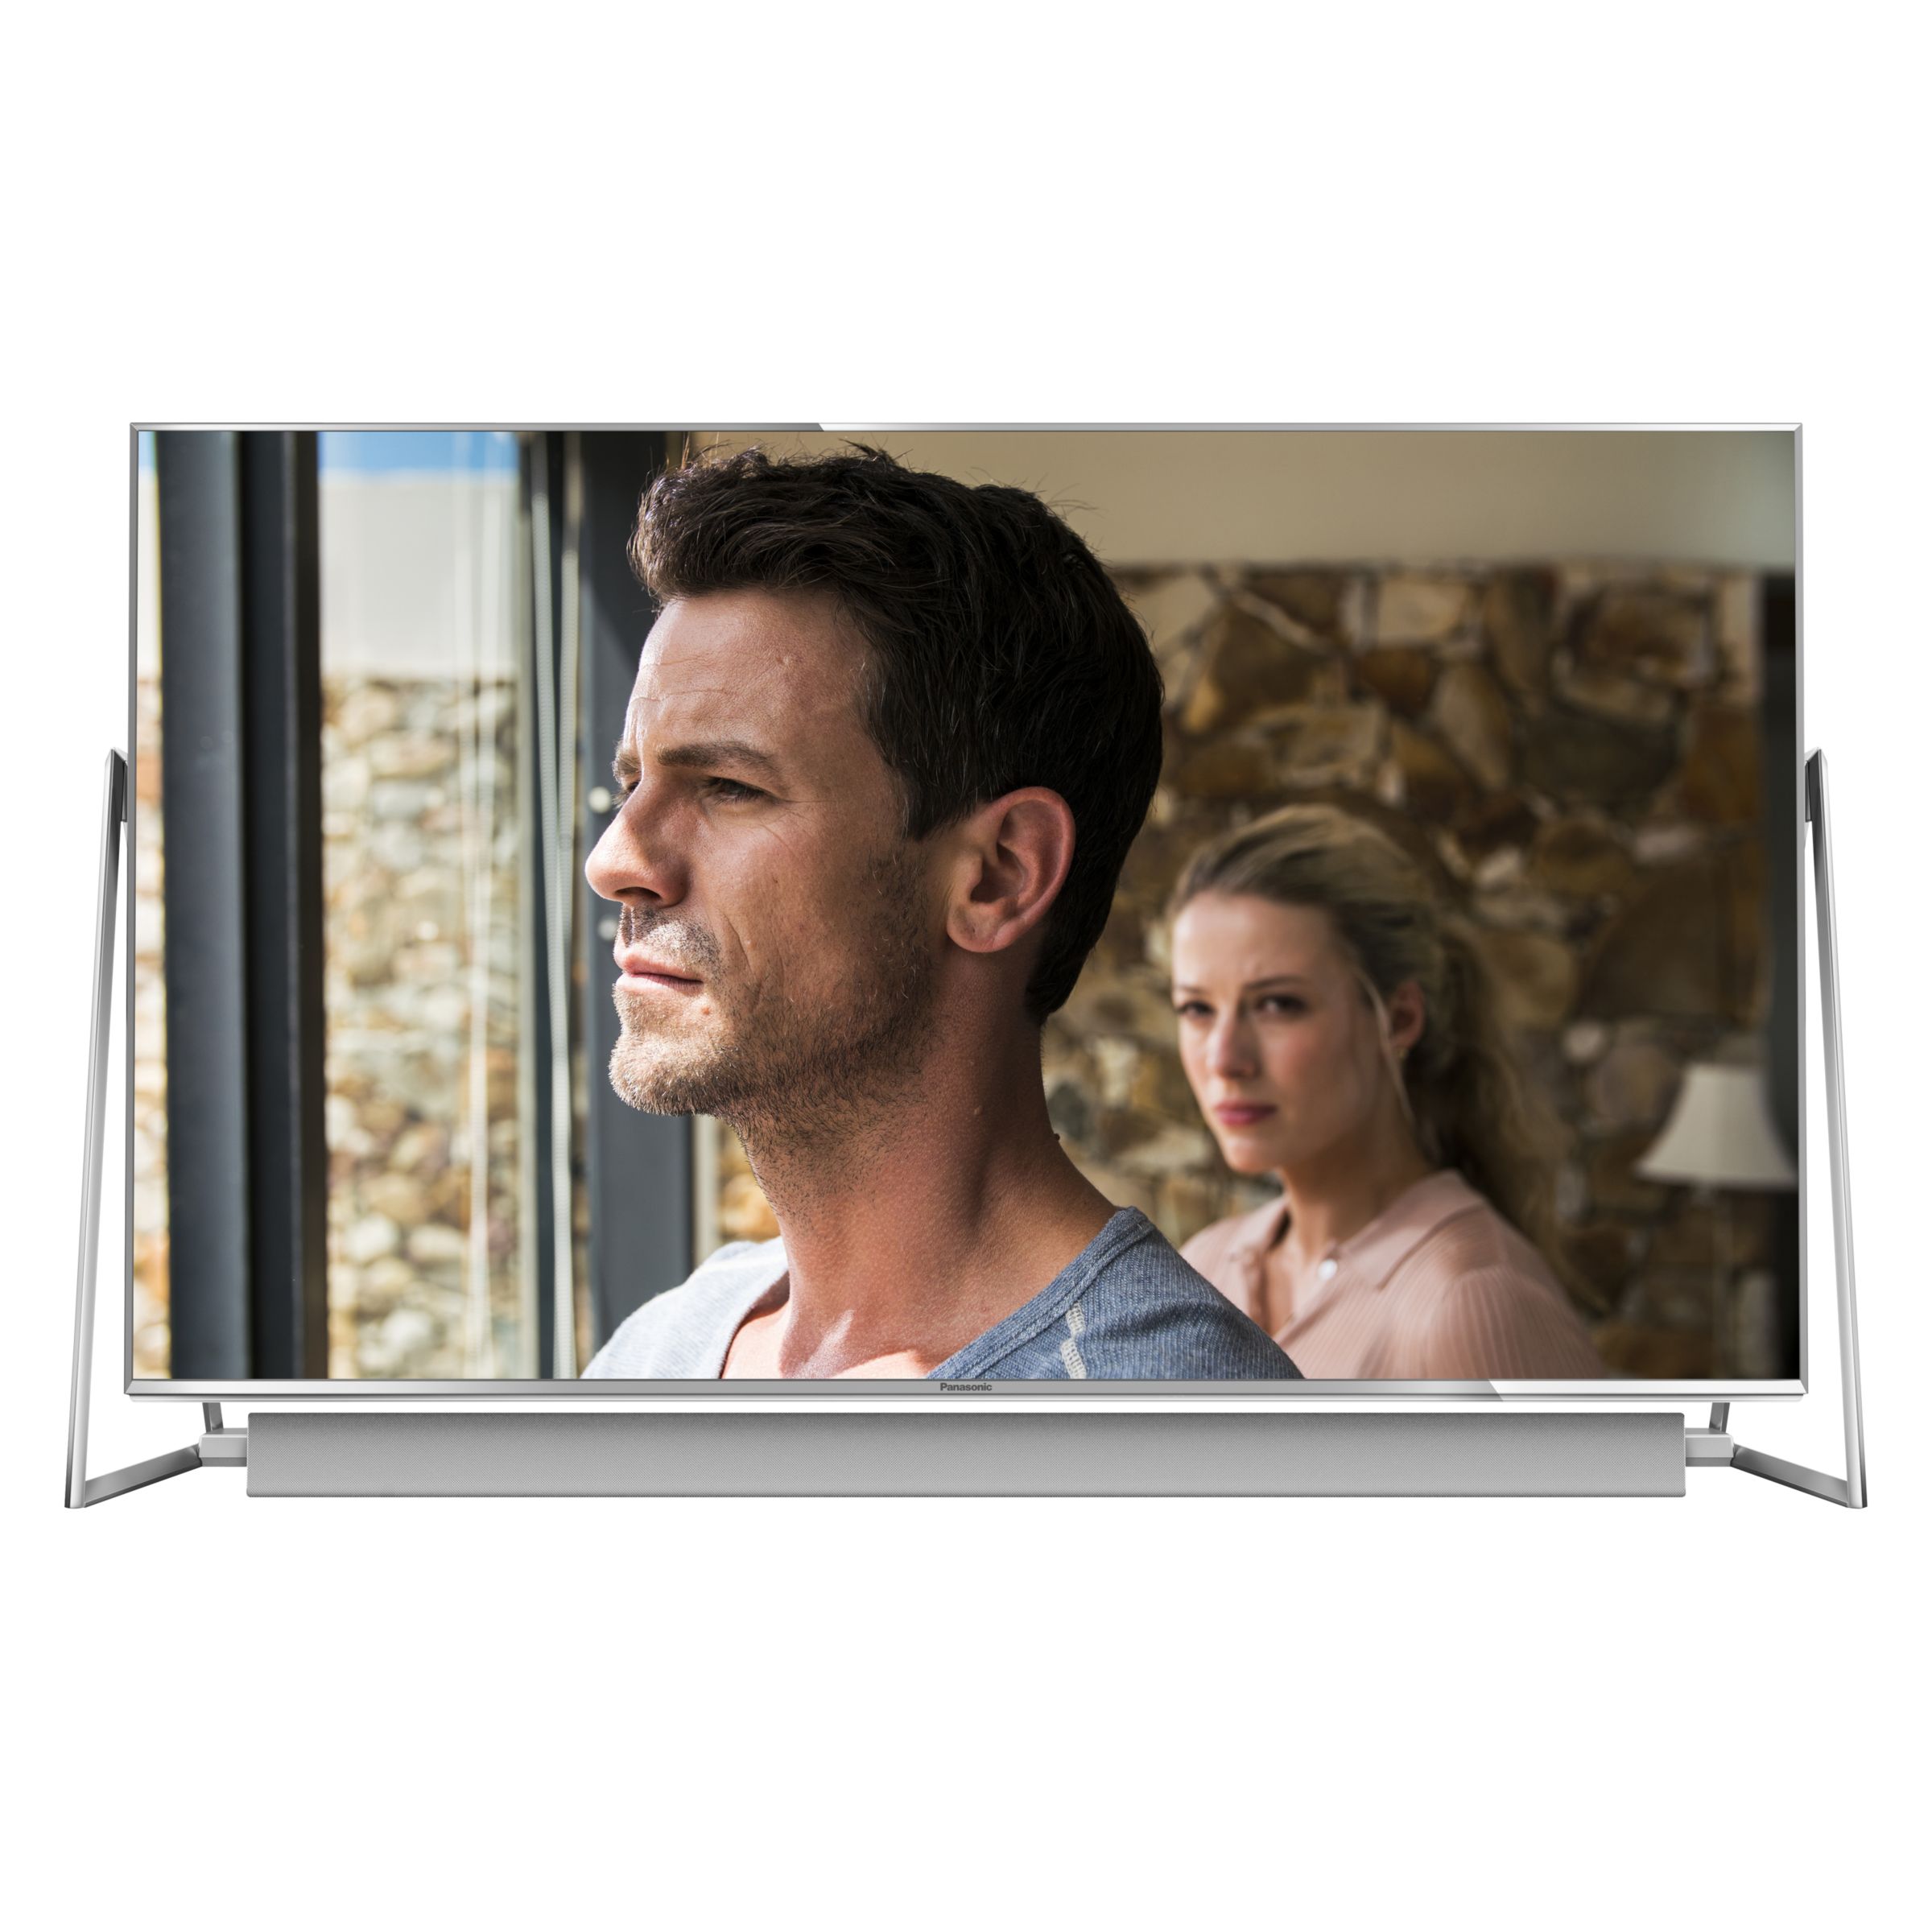 Panasonic TX-58DX802B LED HDR 4K Ultra HD 3D Smart TV, 58" With Freeview Play/freetime, Sound Bar & Art & Interior Freestyle Design, Ultra HD Certified